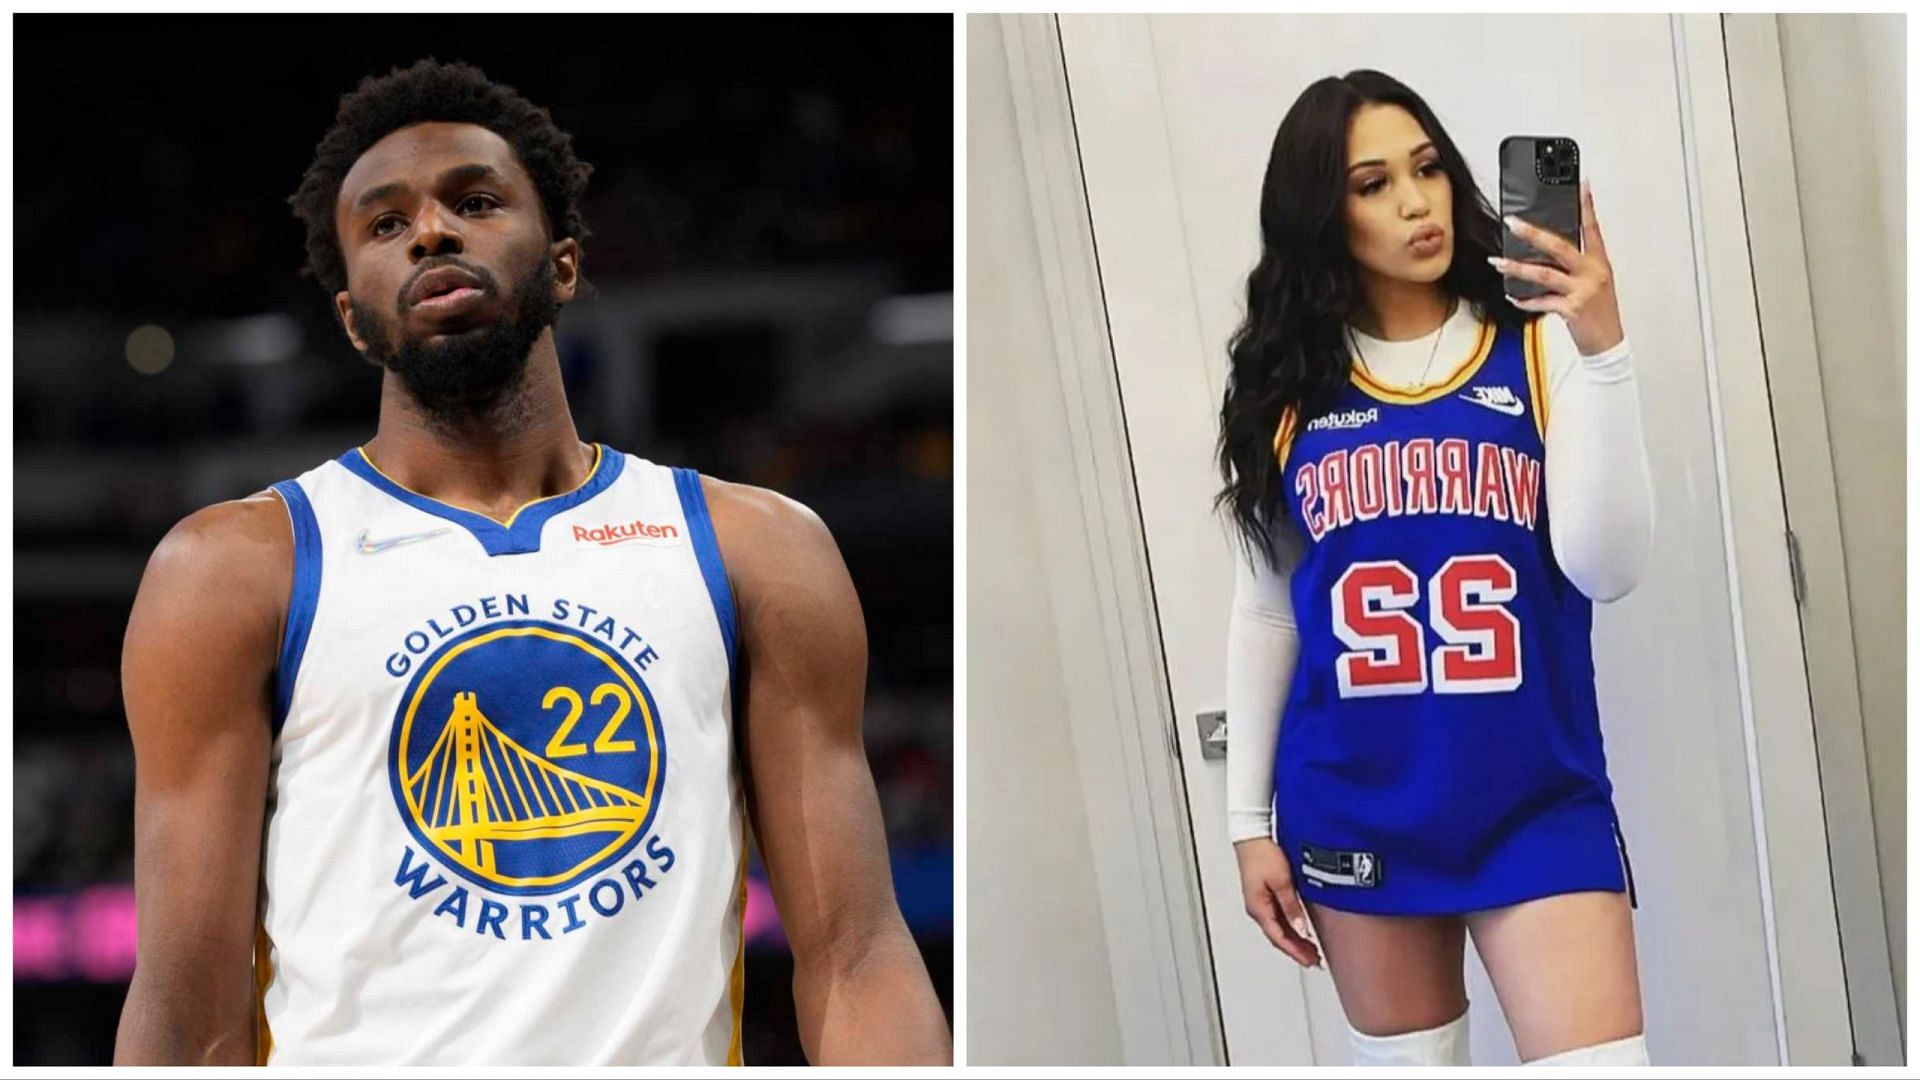 Mychal Johnson (right) posted a cryptic tweet amid her boyfriend Andrew Wiggins